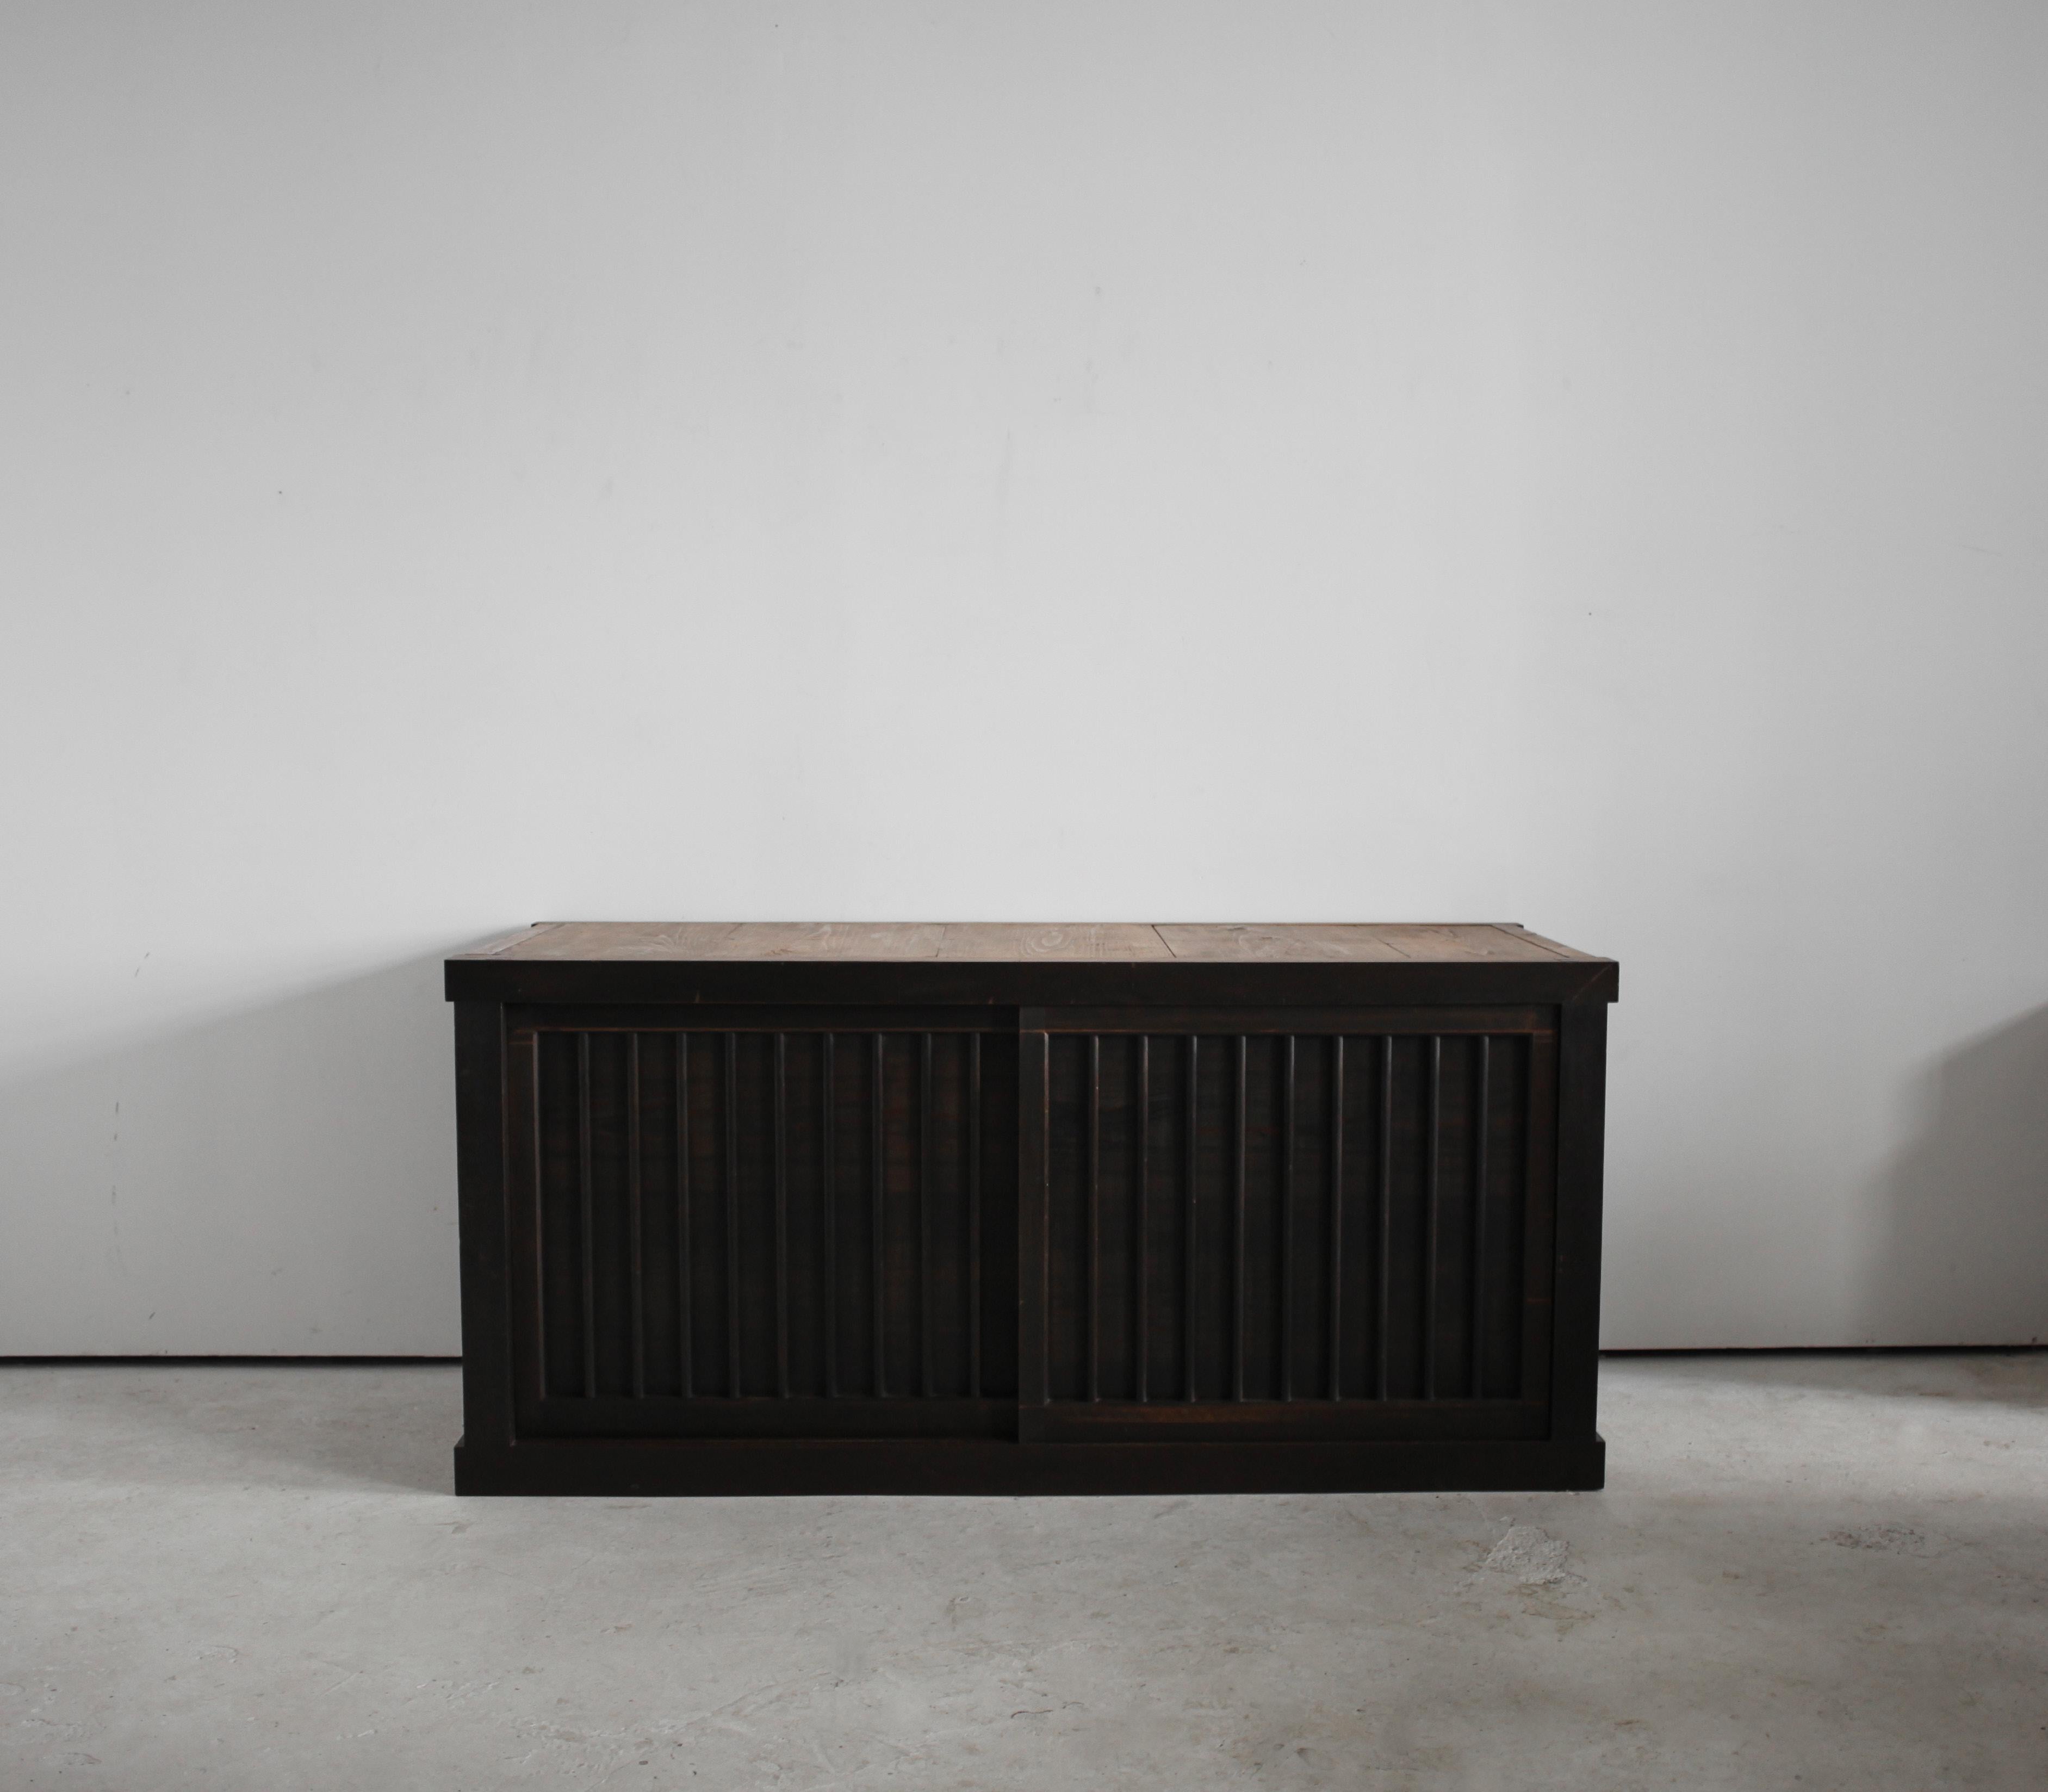 An XL beautifully patinated late 19th C. Japanese tansu/sideboard.

Constructed in cedar with two impressive slatted sliding doors revealing a single interior shelf.
